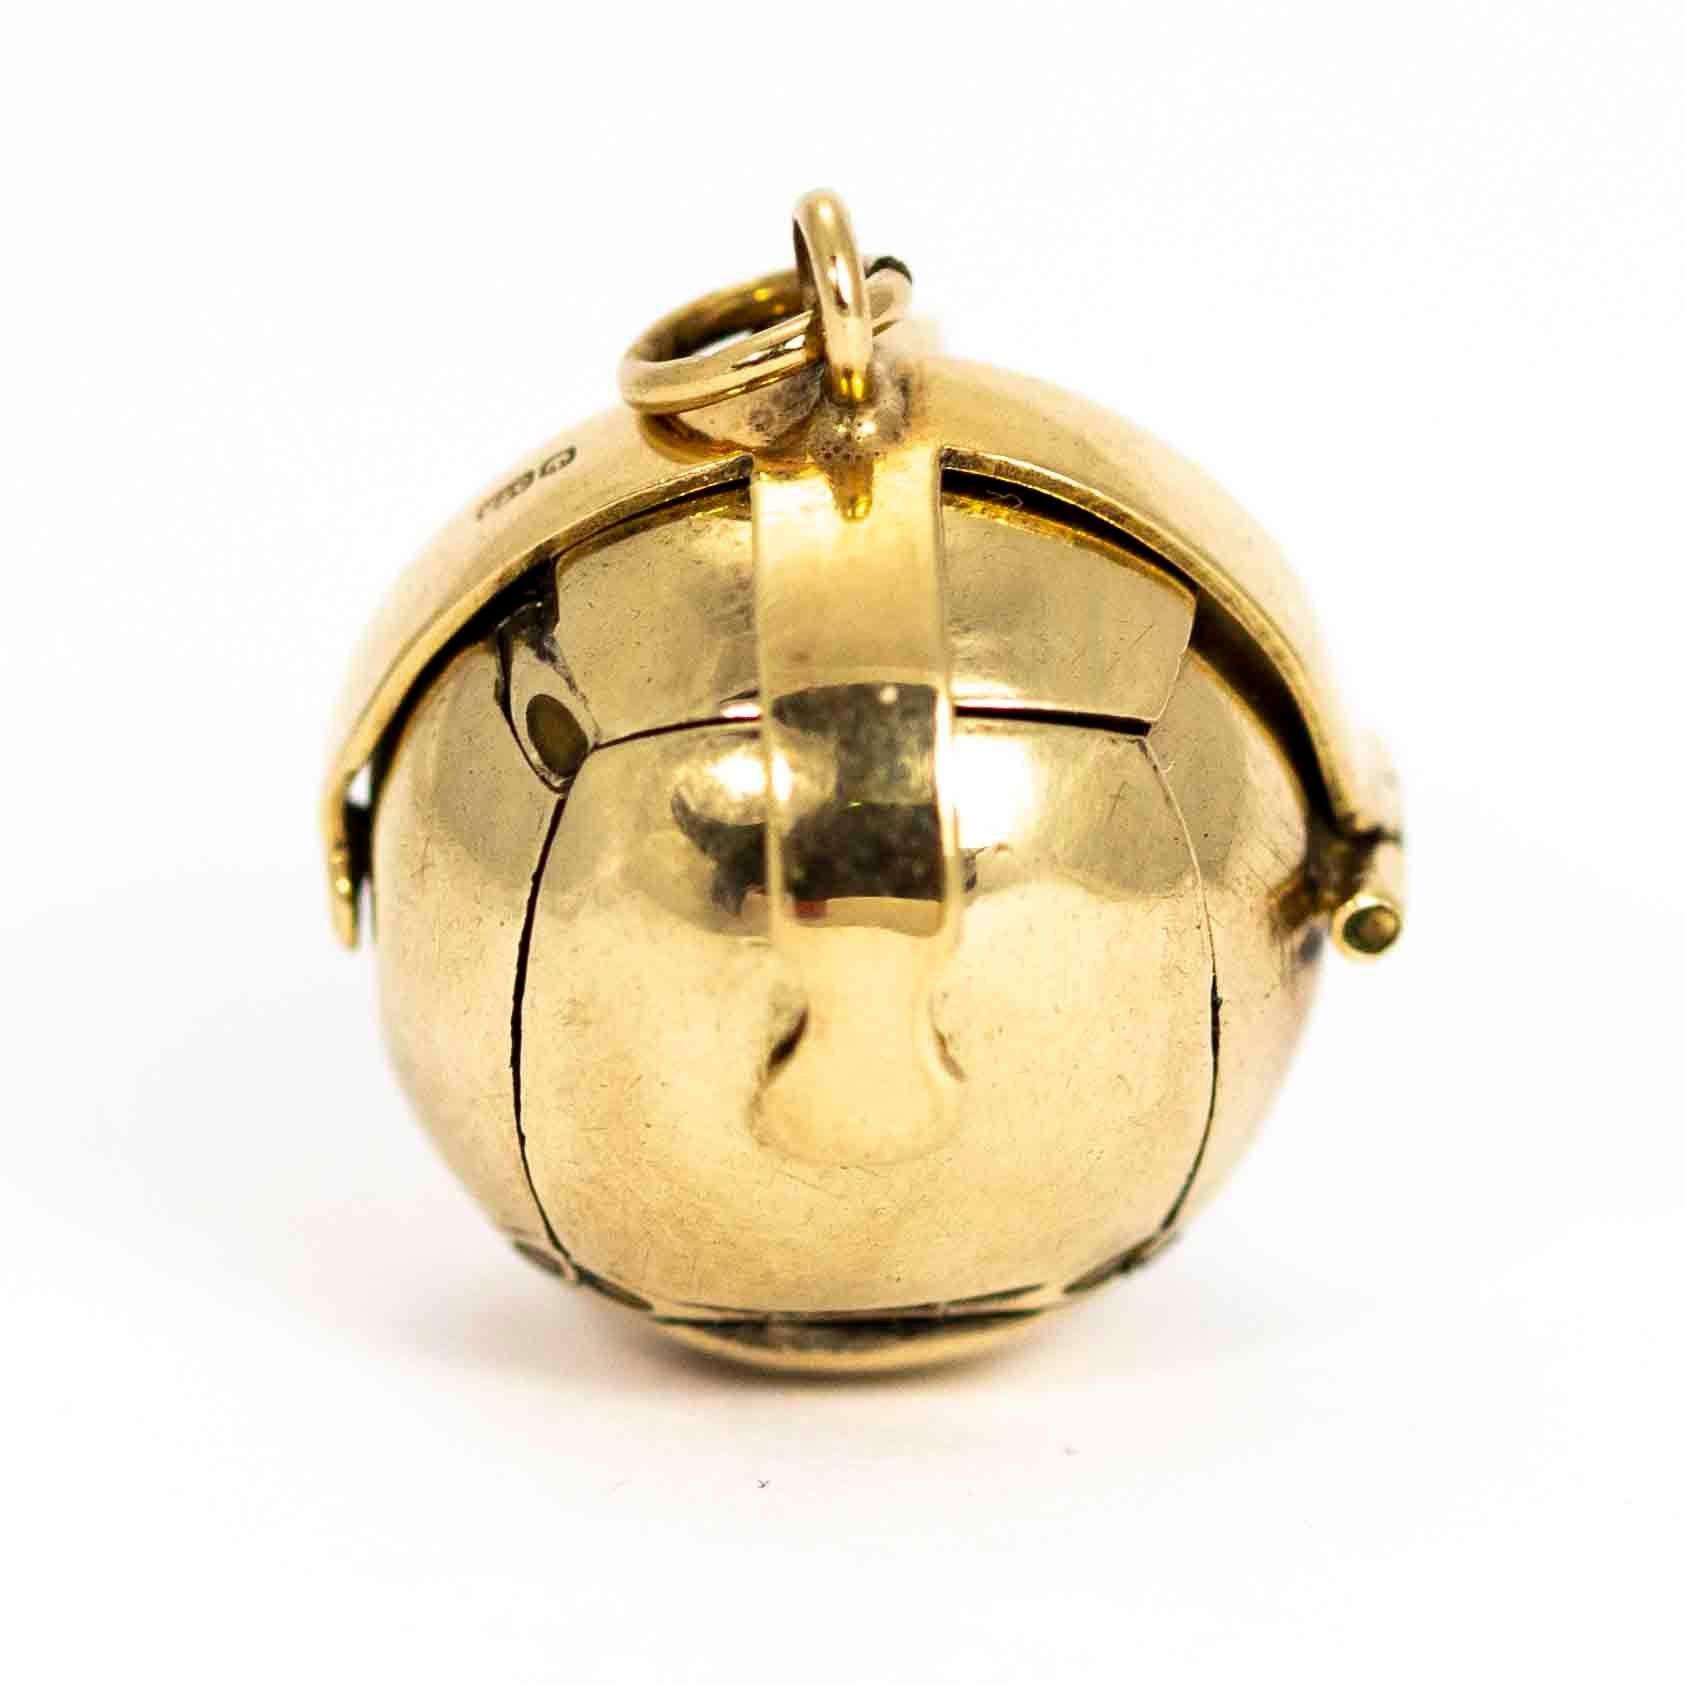 A wonderful vintage masonic orb pendant. The orb opens into a pendant in the shape of a cross comprised of 6 Pyramids and 24 expertly hand-engraved Masonic symbols, 4 symbols per pyramid. The orb has a 9 carat yellow gold shell with gilt